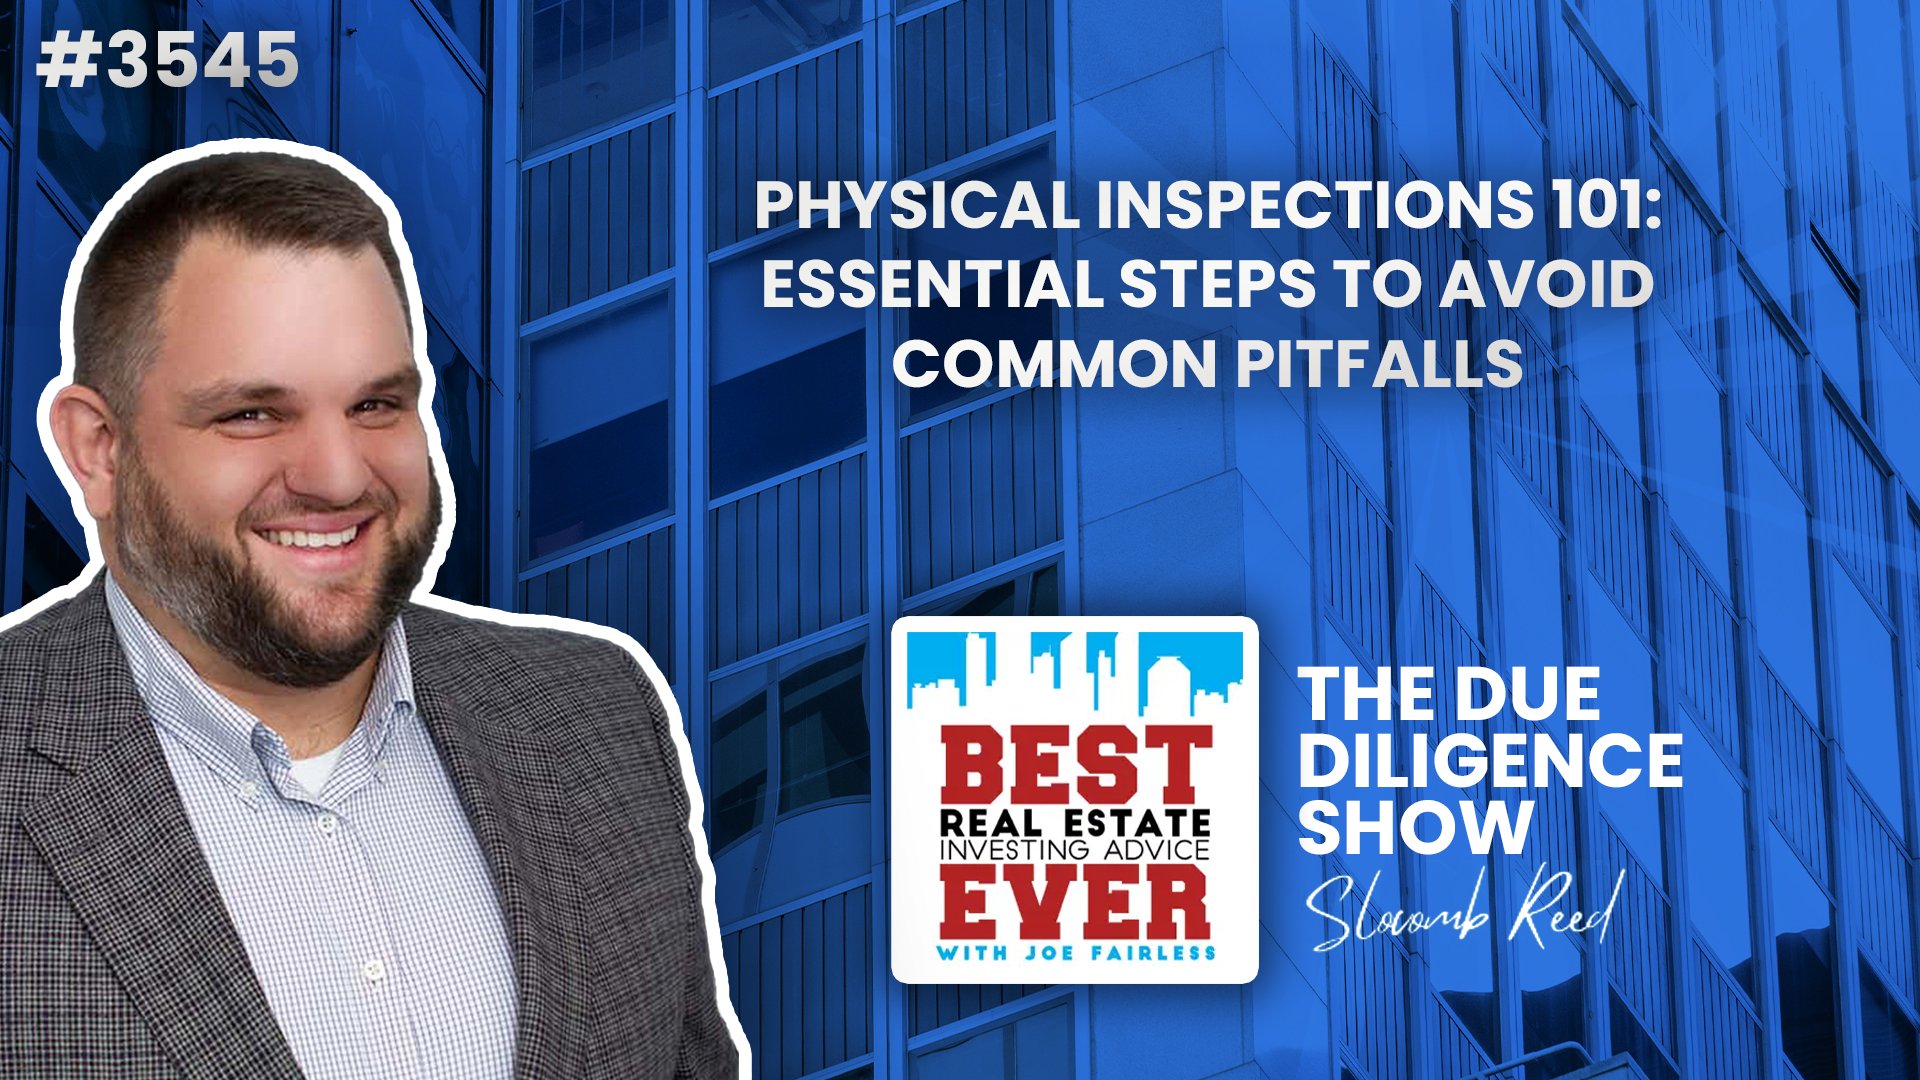 JF3545: Physical Inspections 101: Essential Steps to Avoid Common Pitfalls — The Due Diligence Show ft. Charles Dobens